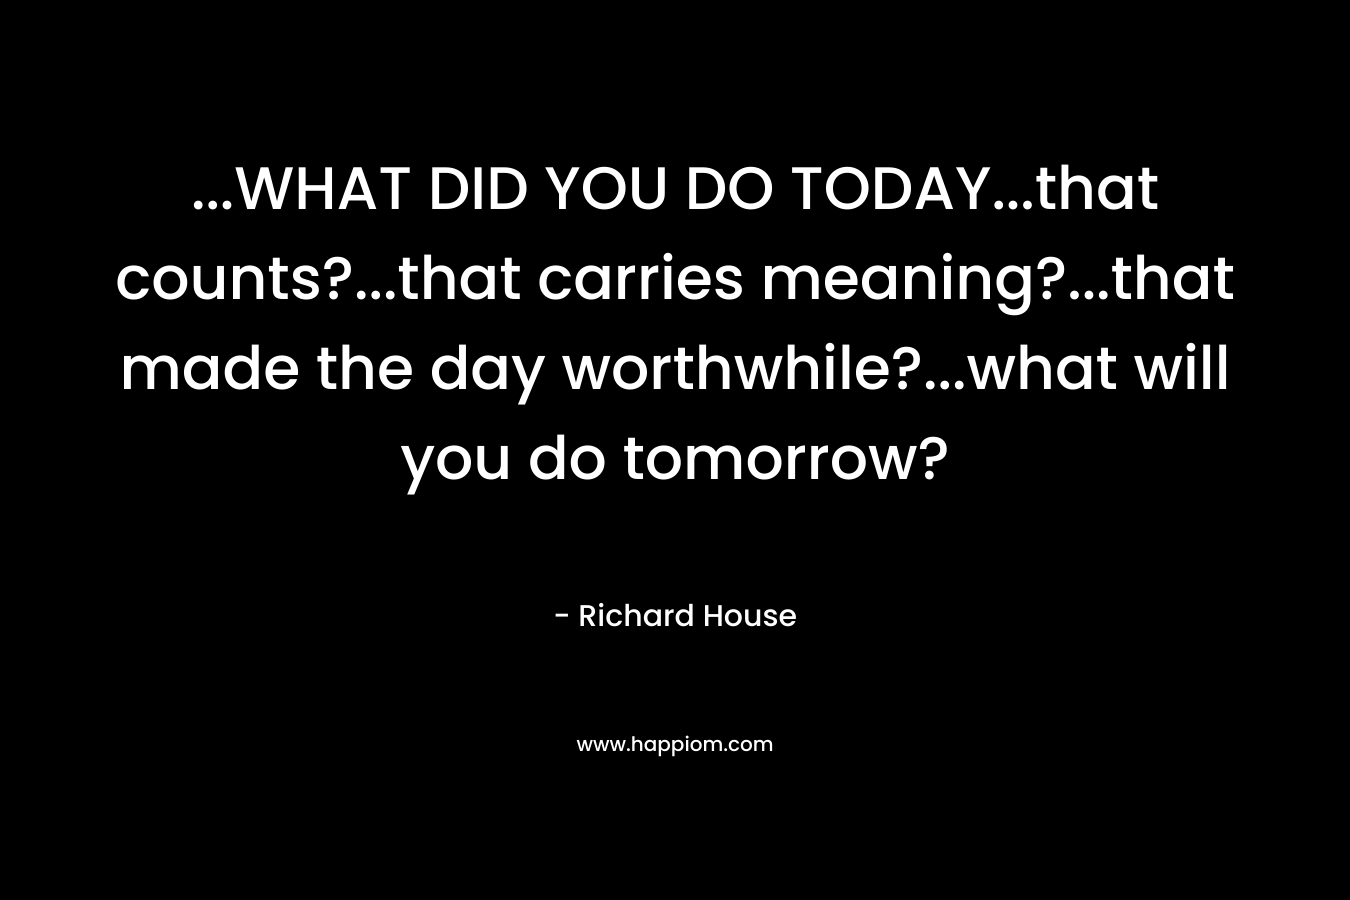 ...WHAT DID YOU DO TODAY...that counts?...that carries meaning?...that made the day worthwhile?...what will you do tomorrow?